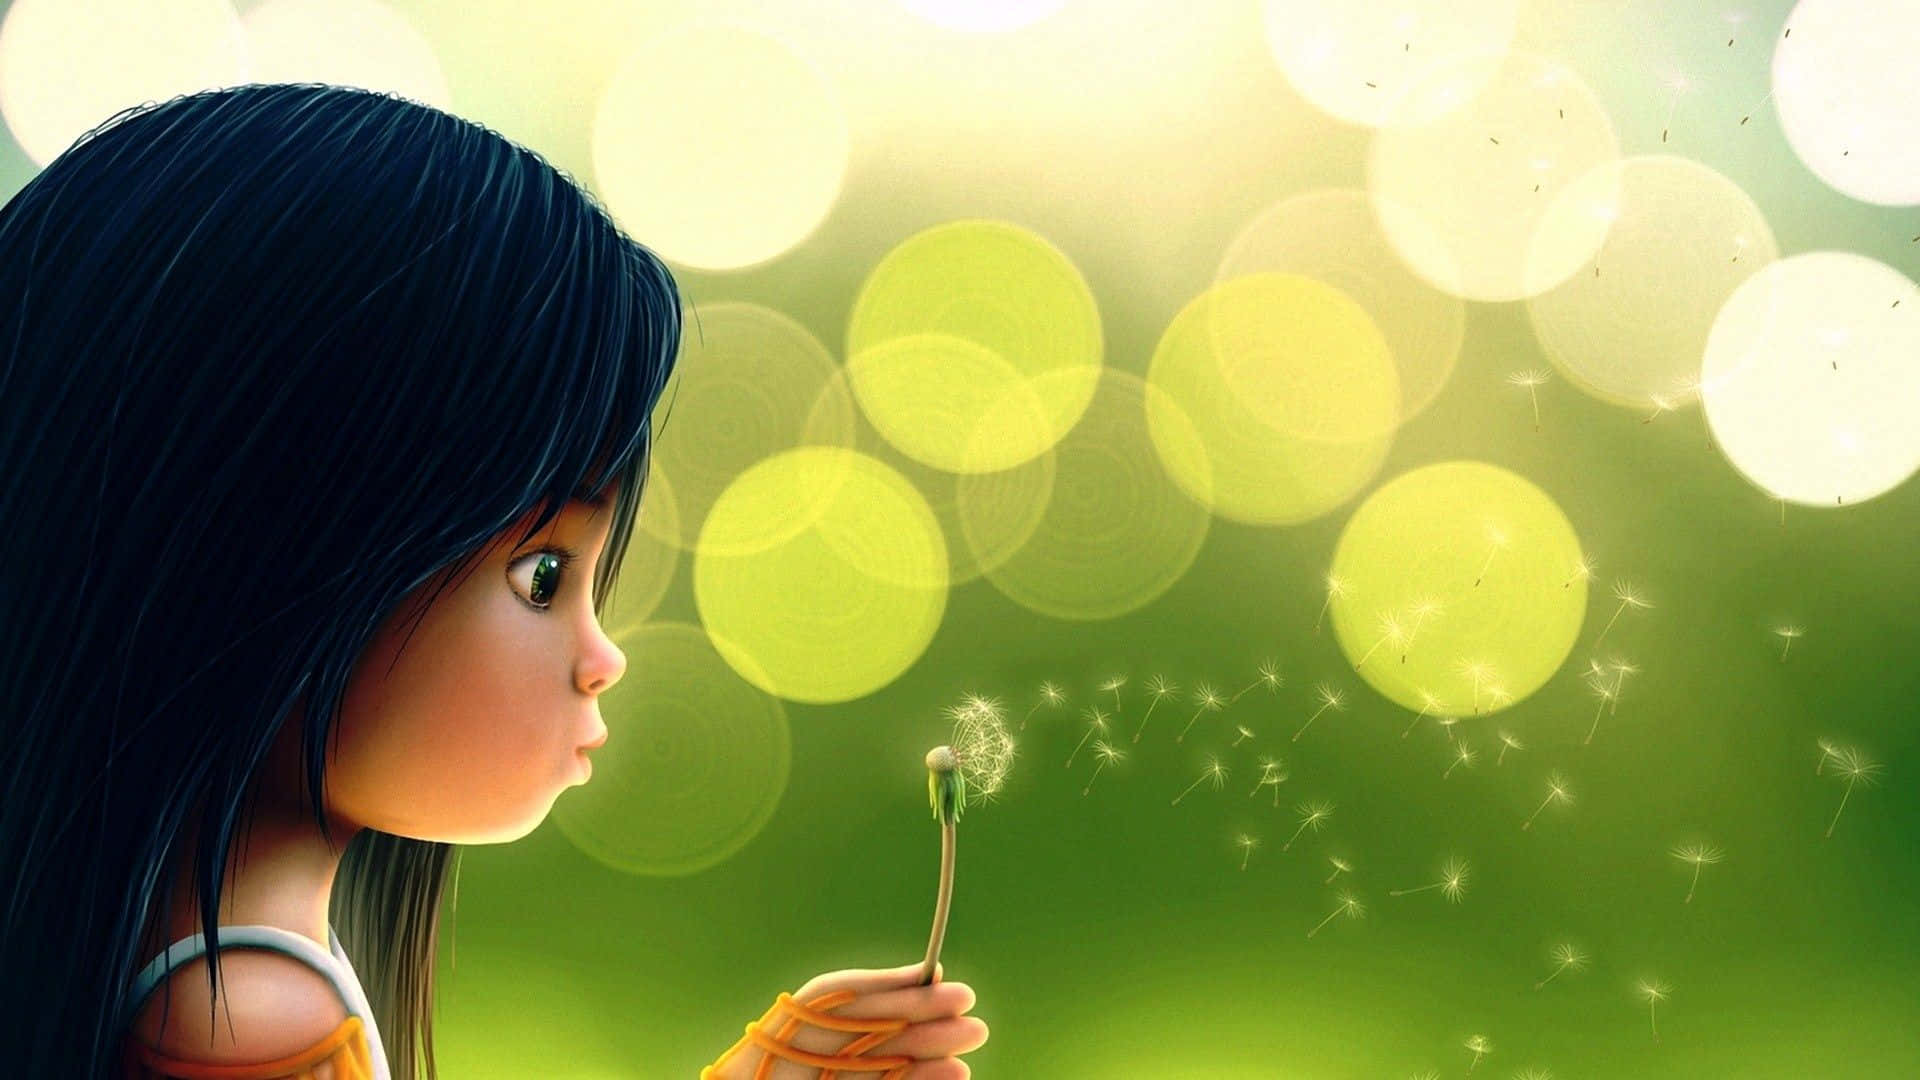 A Girl Blowing A Dandelion In The Grass Background